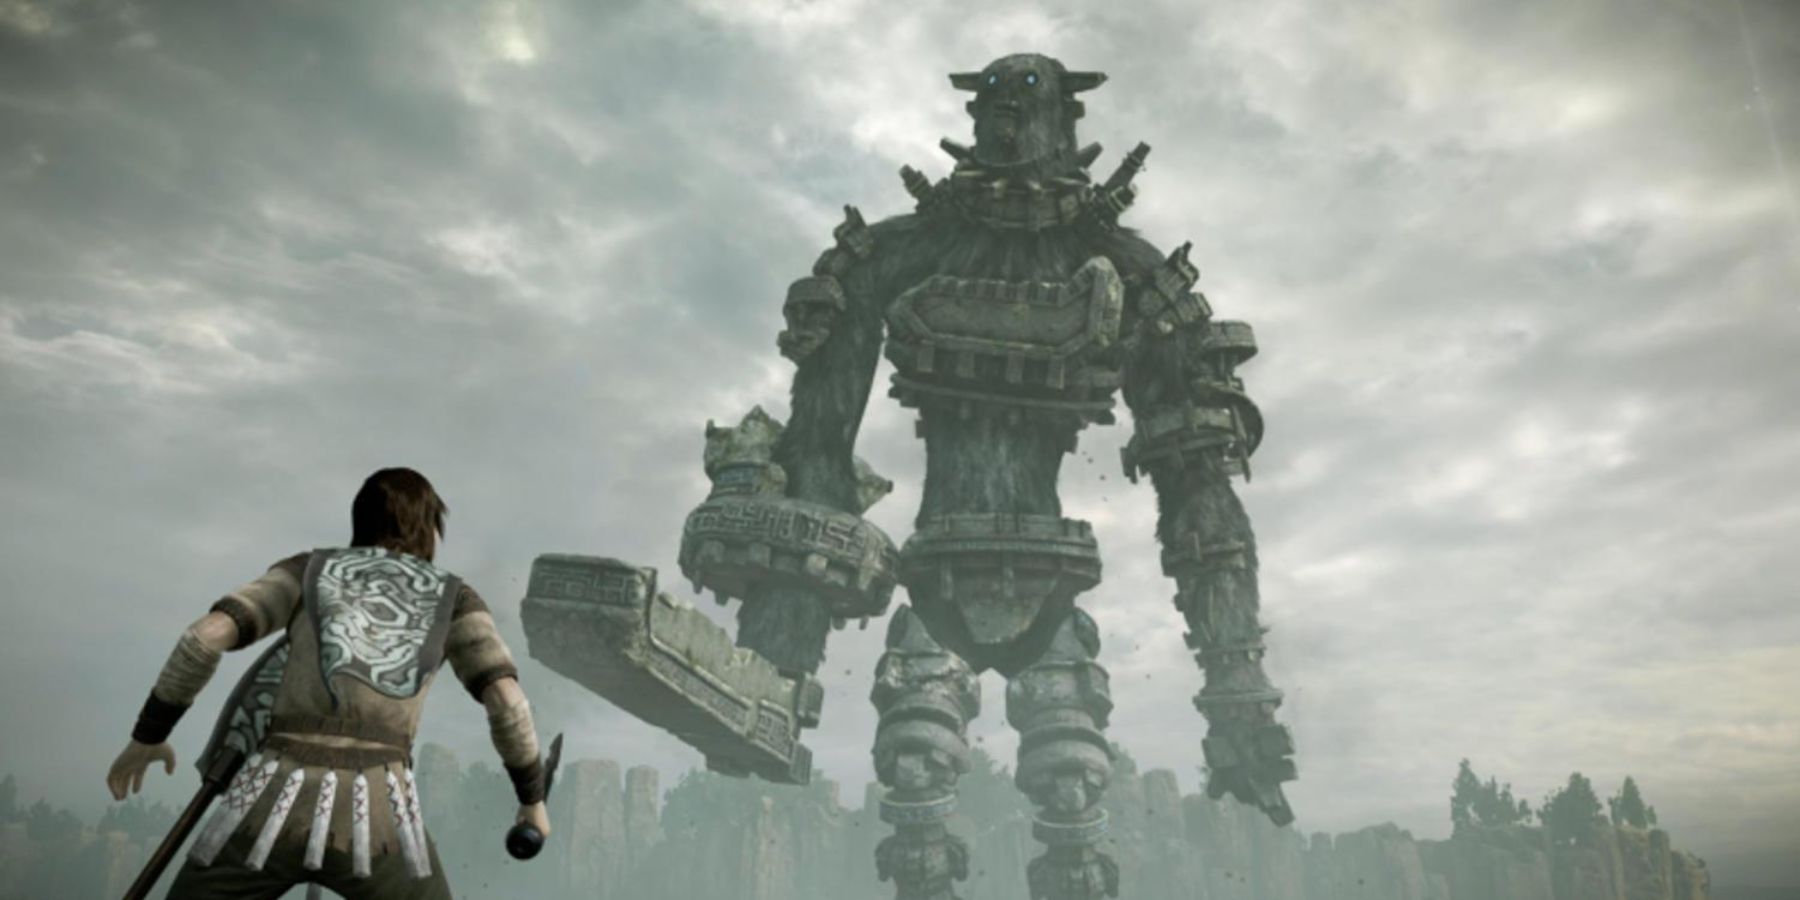 Wander about to engage a Colossus in Shadow of the Colossus